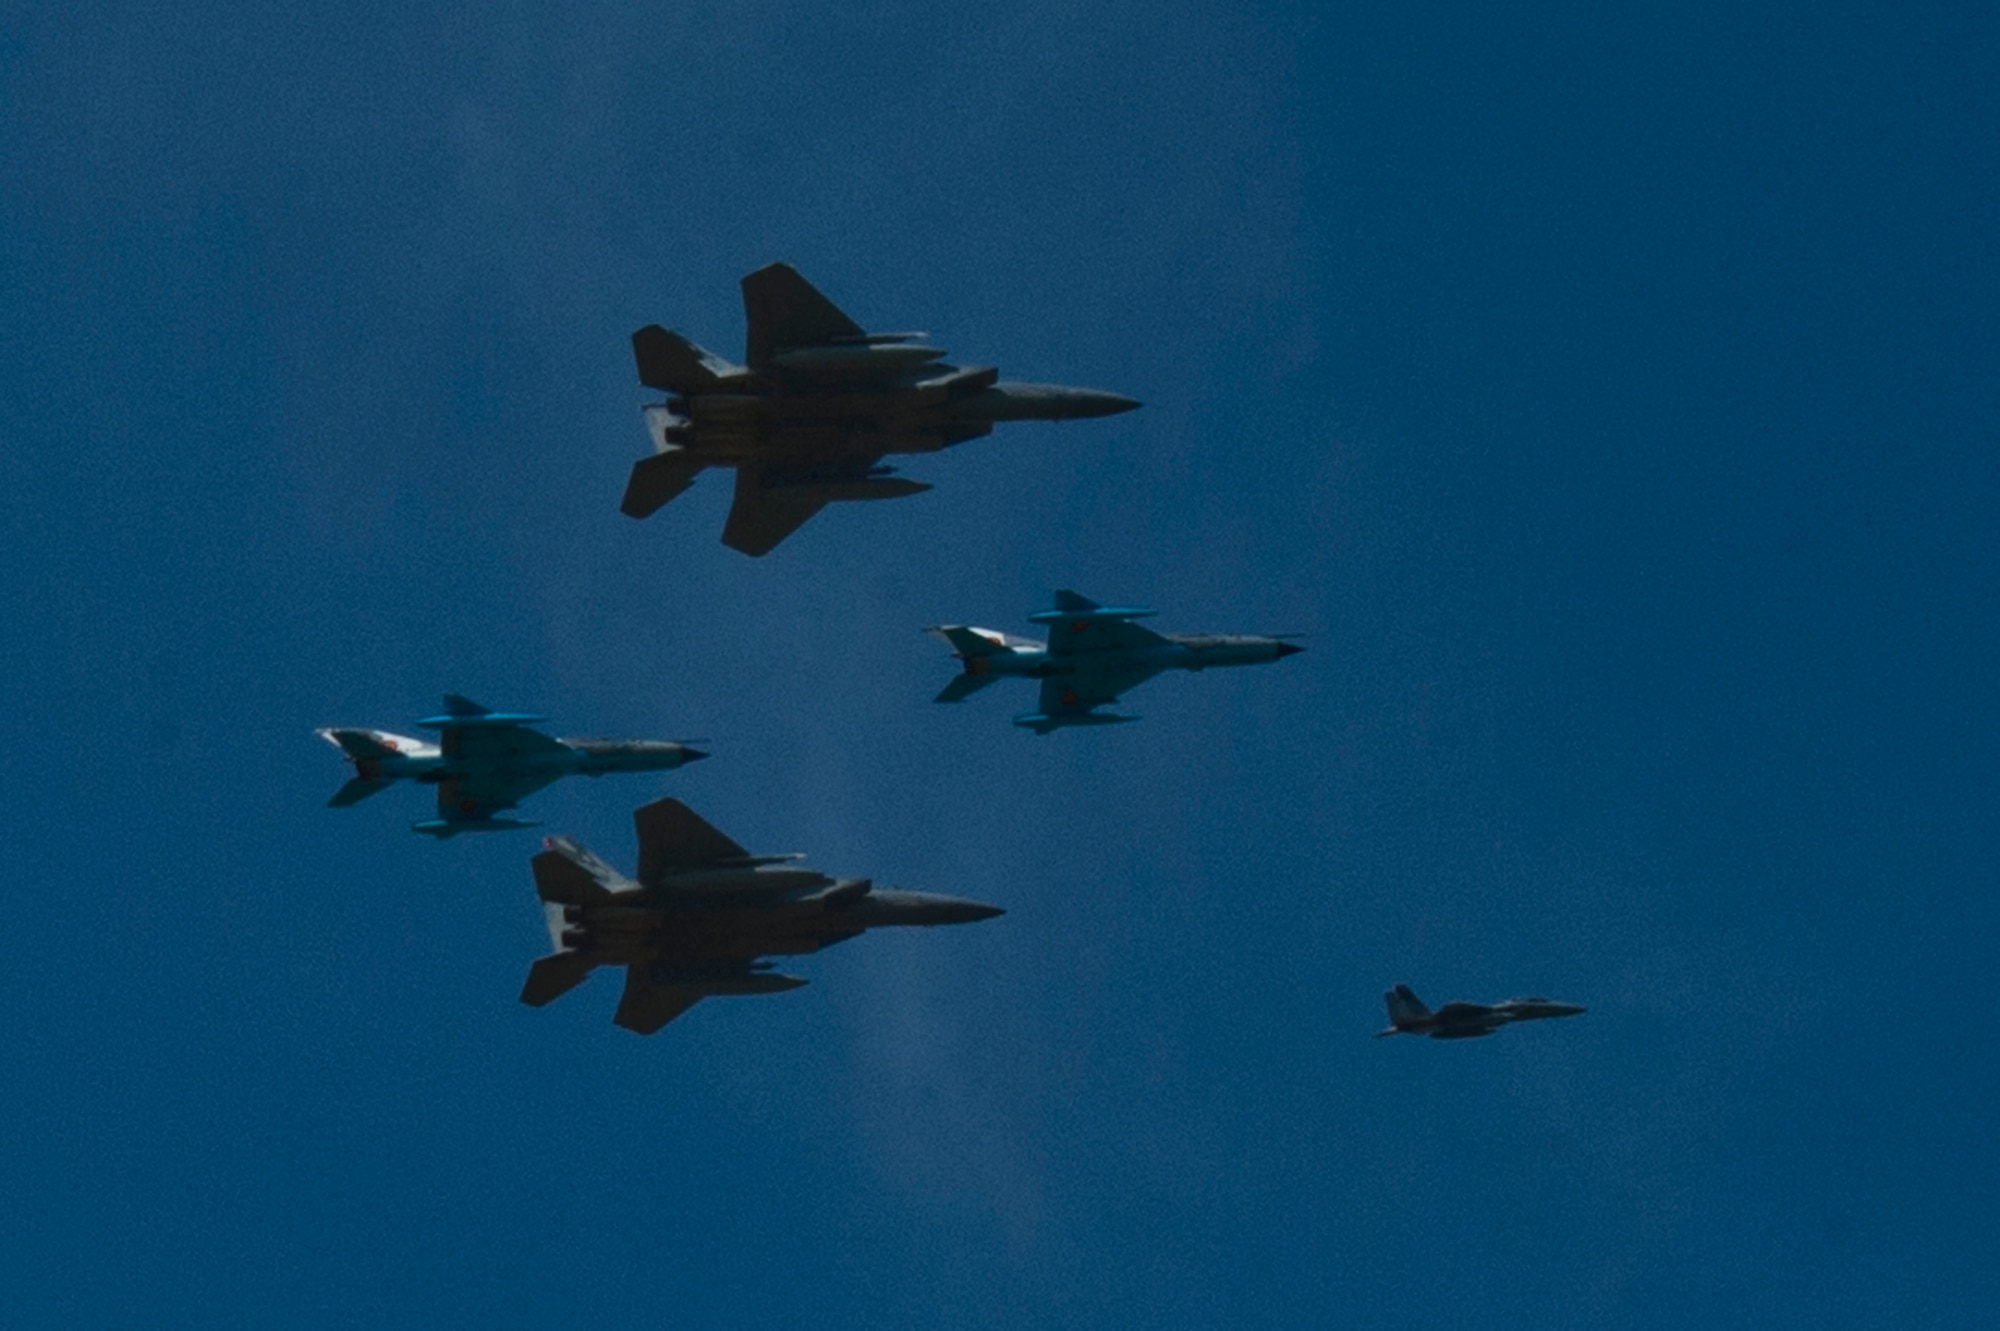 A flight formation of Romanian air force MiG-21 LanceR aircraft and U.S. Air Force F-15C Eagle fighter aircraft fly during the RoAF's 71st Air Base's air show and open house at Campia Turzii, Romania, July 23, 2016.  The aviation demonstration took place during the middle of the U.S. Air Force's 194th Expeditionary Fighter Squadron's six-month long theater security package deployment to Europe in support of Operation Atlantic Resolve, which aims to bolster the U.S.'s continued commitment to the collective security of NATO and dedication to the enduring peace and stability in the region. The unit, comprised of more than 200 CANG Airmen from the 144th Fighter Wing at Fresno ANG Base, Calif., as well as U.S. Air Force Airmen from the 52nd Fighter Wing at Spangdahlem Air Base, Germany, piloted, maintained and supported the deployment of 12 F-15Cs Eagle fighter aircraft throughout nations like Romania, Iceland, the United Kingdom, the Netherlands, Estonia and among others. The F-15Cs took to the skies alongside the 71st AB's MiG-21 fighter aircraft and Puma helicopters for both the airshow, the second engagement of its kind at Campia Turzii under Operation Atlantic Resolve, and the bilateral flight training, also known as Dacian Eagle 2016. (U.S. Air Force photo by Staff Sgt. Joe W. McFadden/Released)